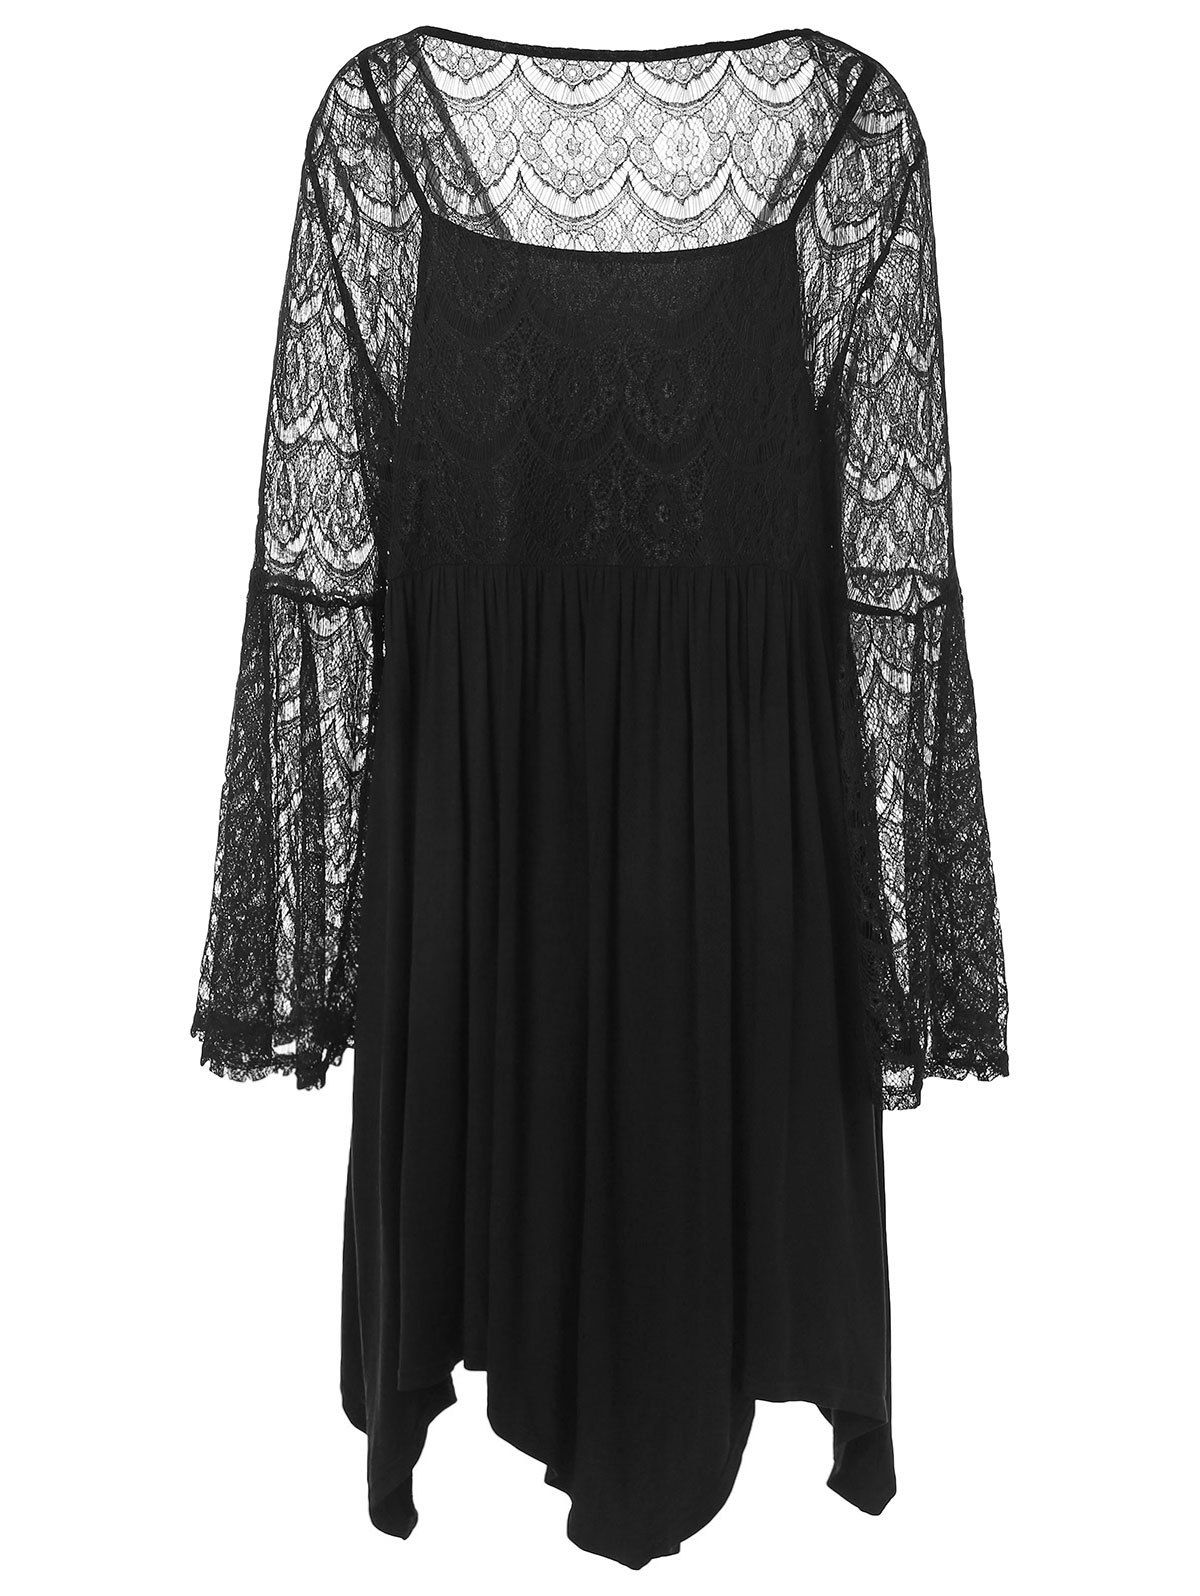 [31% OFF] 2021 Plus Size Plunging Neckline Bell Sleeve Lace Insert ...